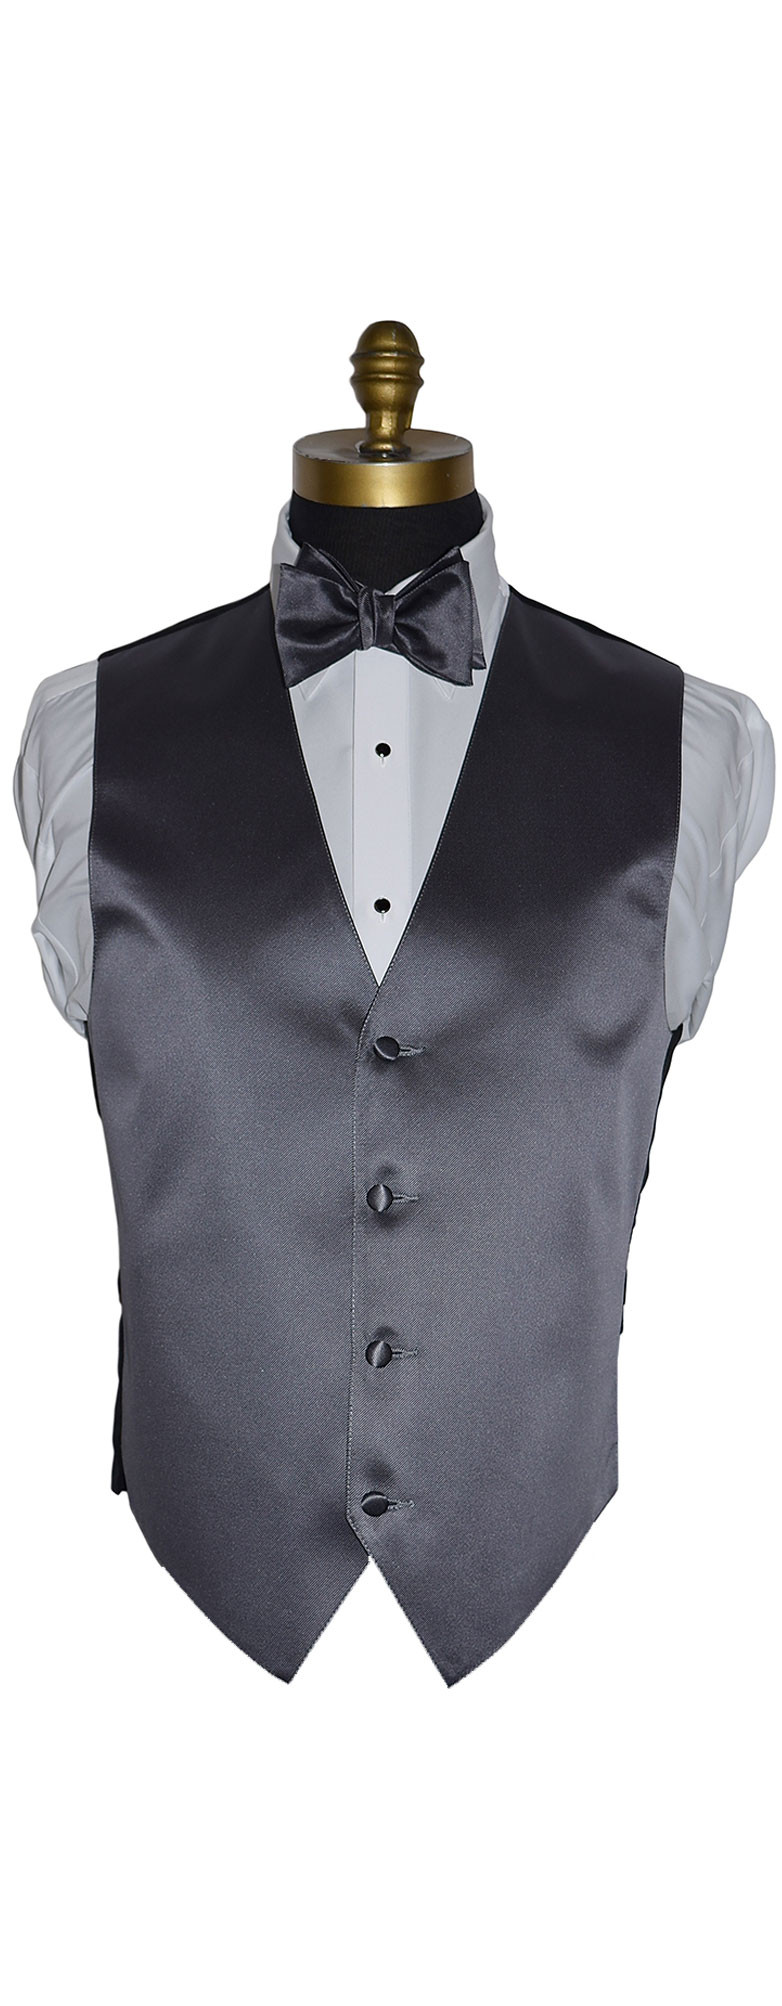 men's and boy's charcoal vest and bowtie by San Miguel Formals